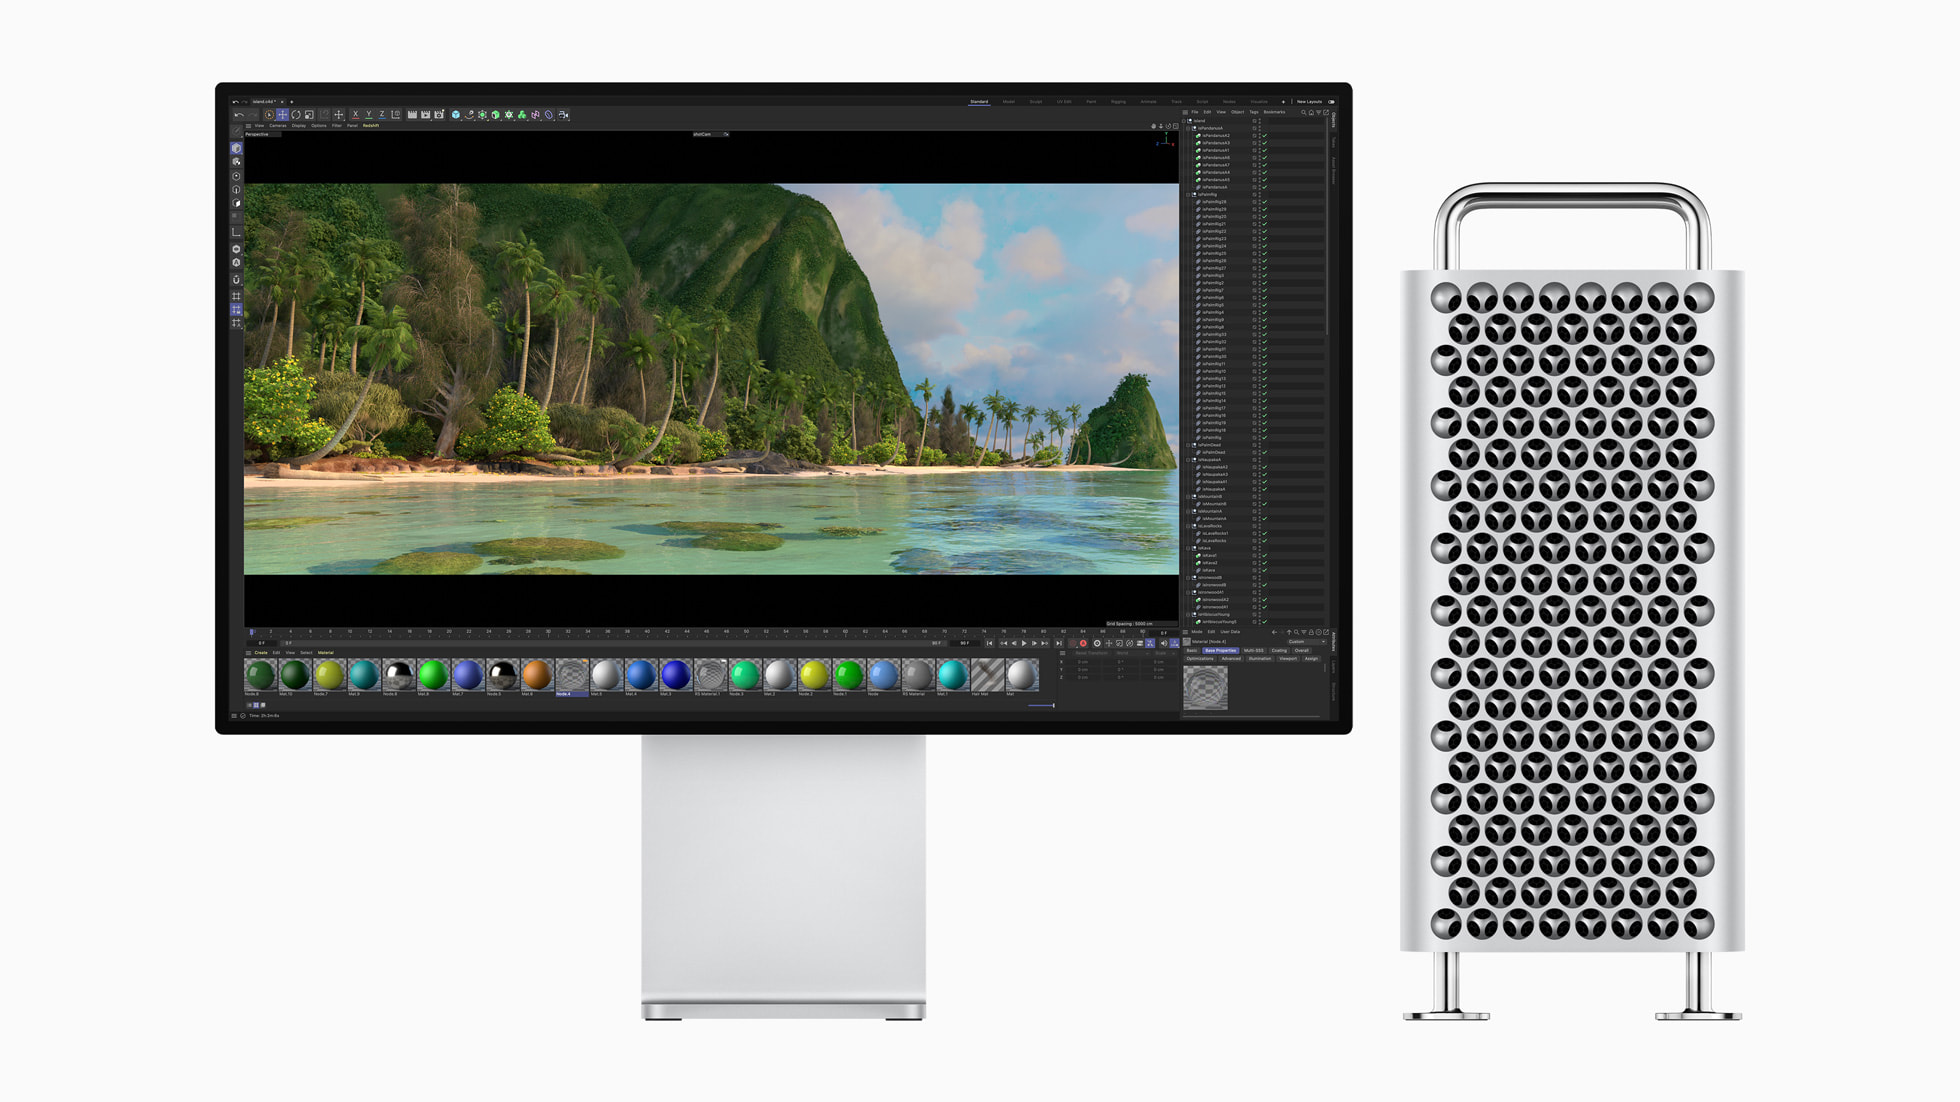 Transition to Apple Silicon complete: New Mac Pro with M2 Ultra chip debuted at WWDC